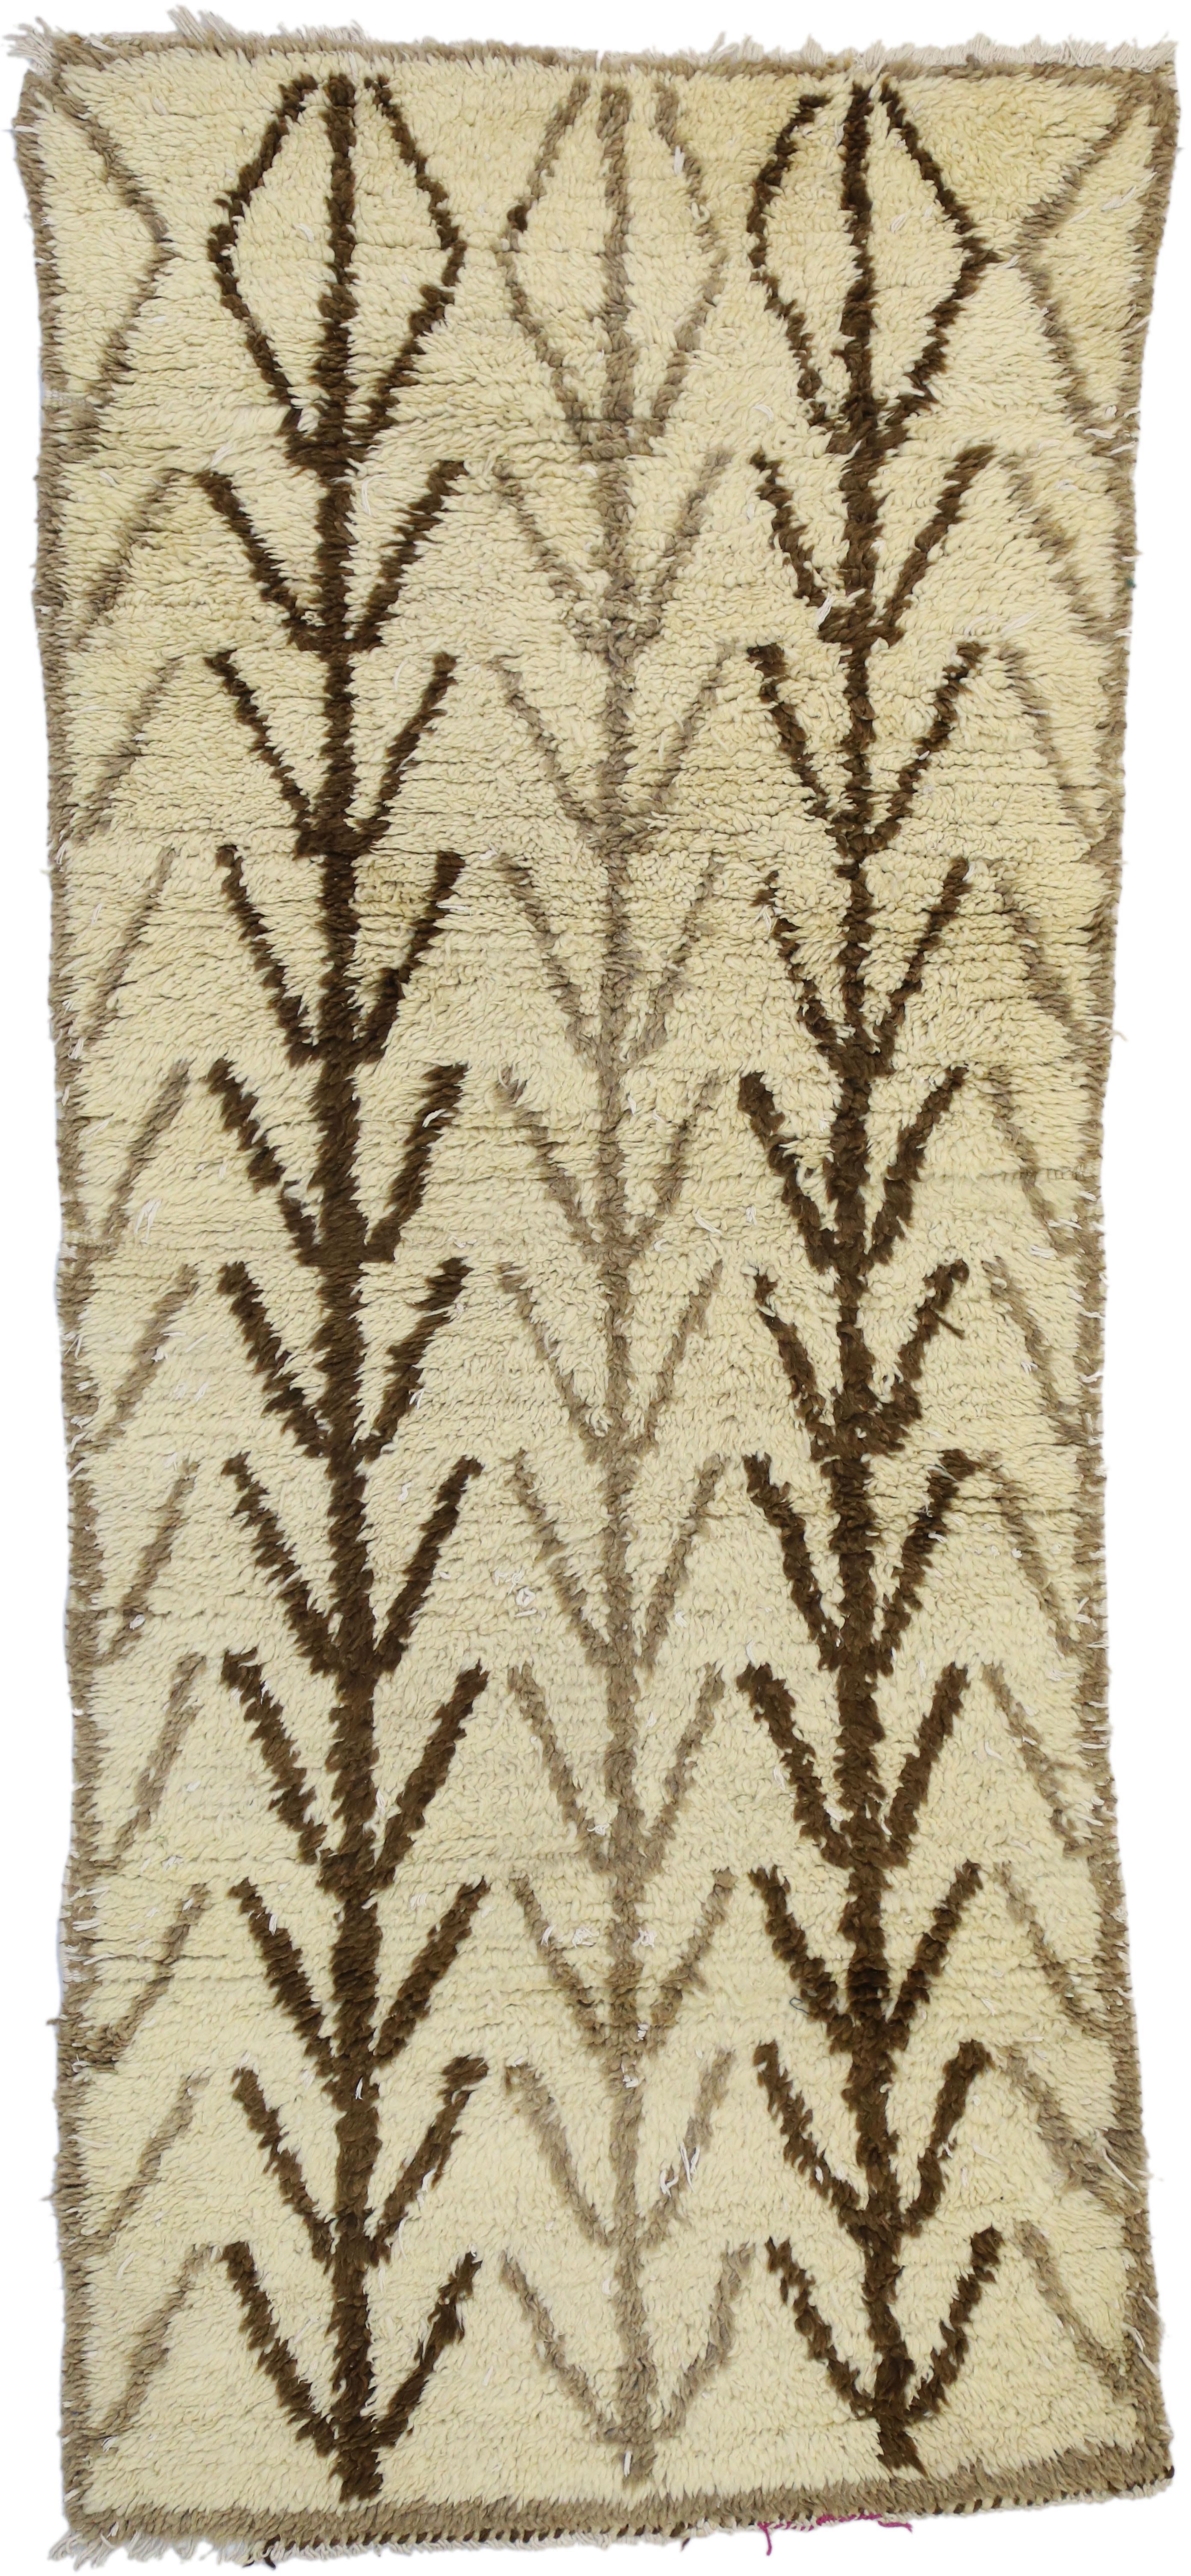 20869 Vintage Berber Moroccan Rug with Modern Style 02'06 x 05'08. This hand knotted wool vintage Moroccan rug features three columns of a twig-like shape. In Ancient Berber rug-making, the twig motif, similar to that of a fish-bone, represents the